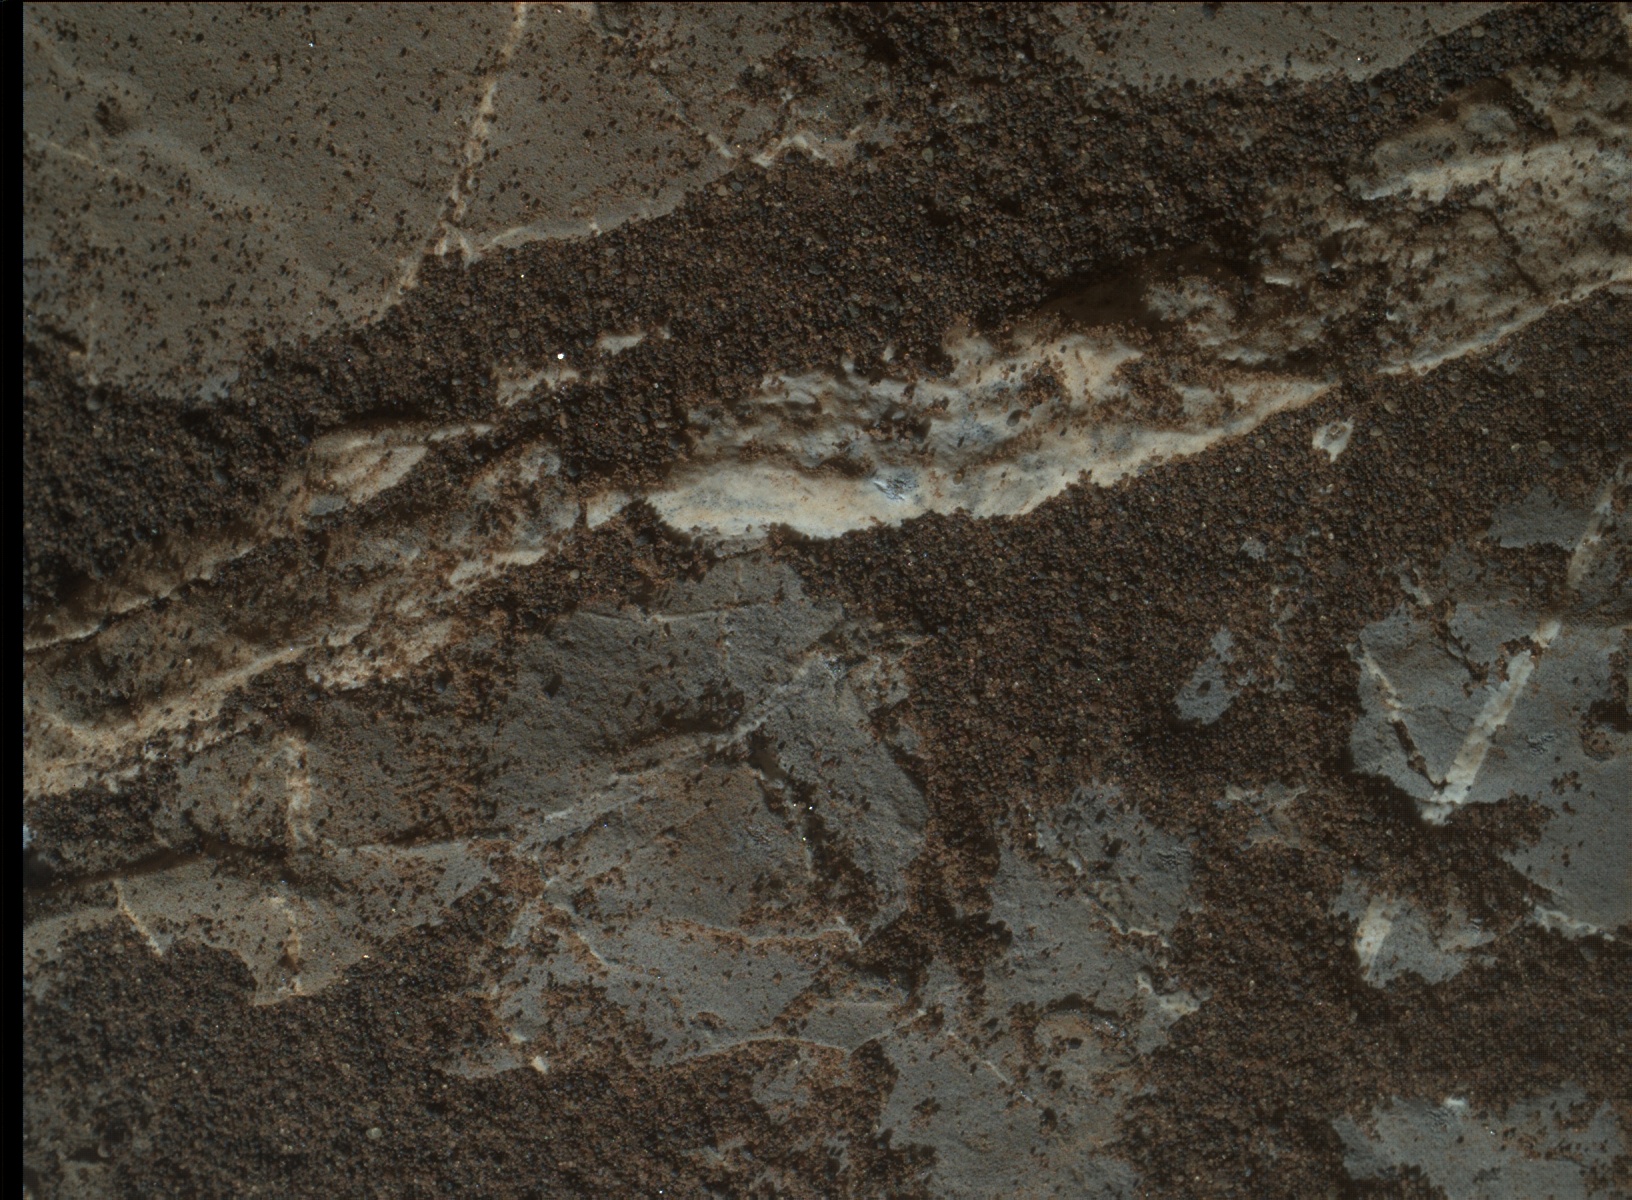 Nasa's Mars rover Curiosity acquired this image using its Mars Hand Lens Imager (MAHLI) on Sol 1975